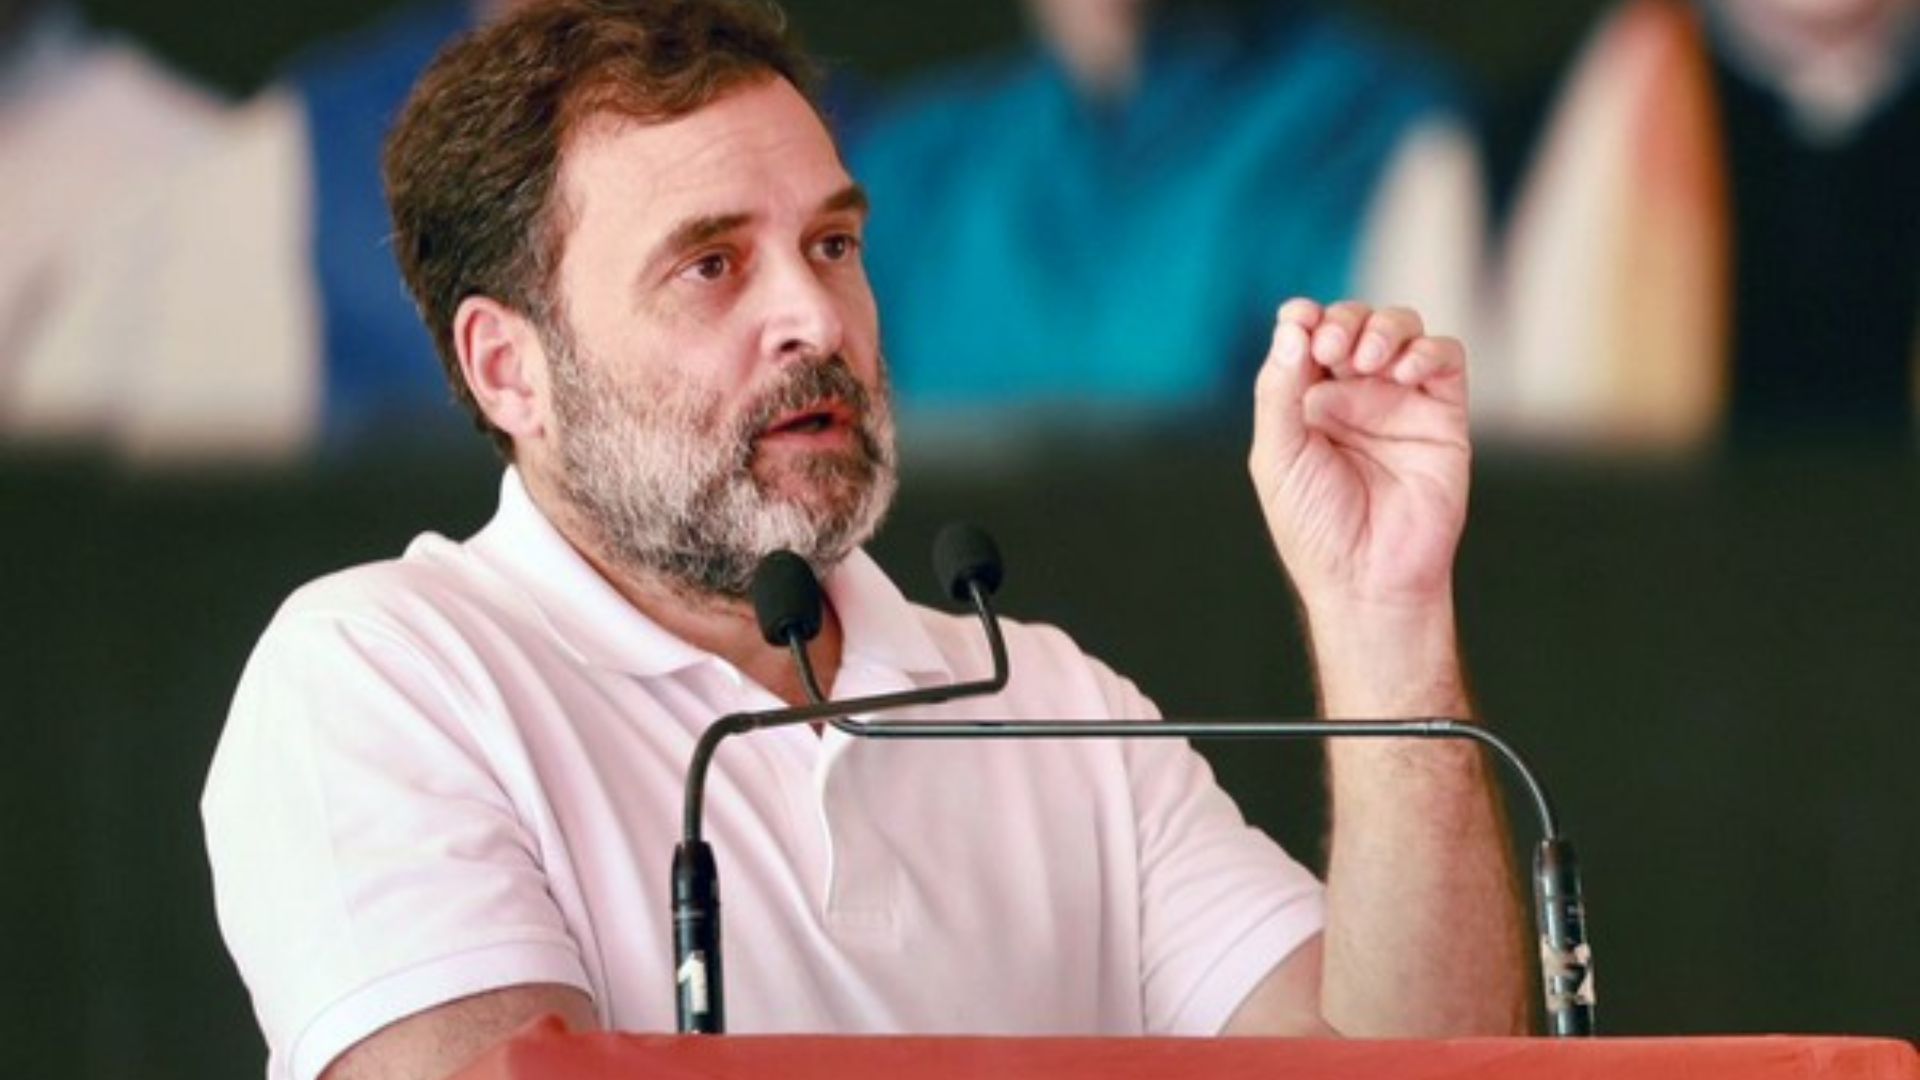 ECI issues show cause notice to Rahul Gandhi over his disparaging remarks against PM Modi